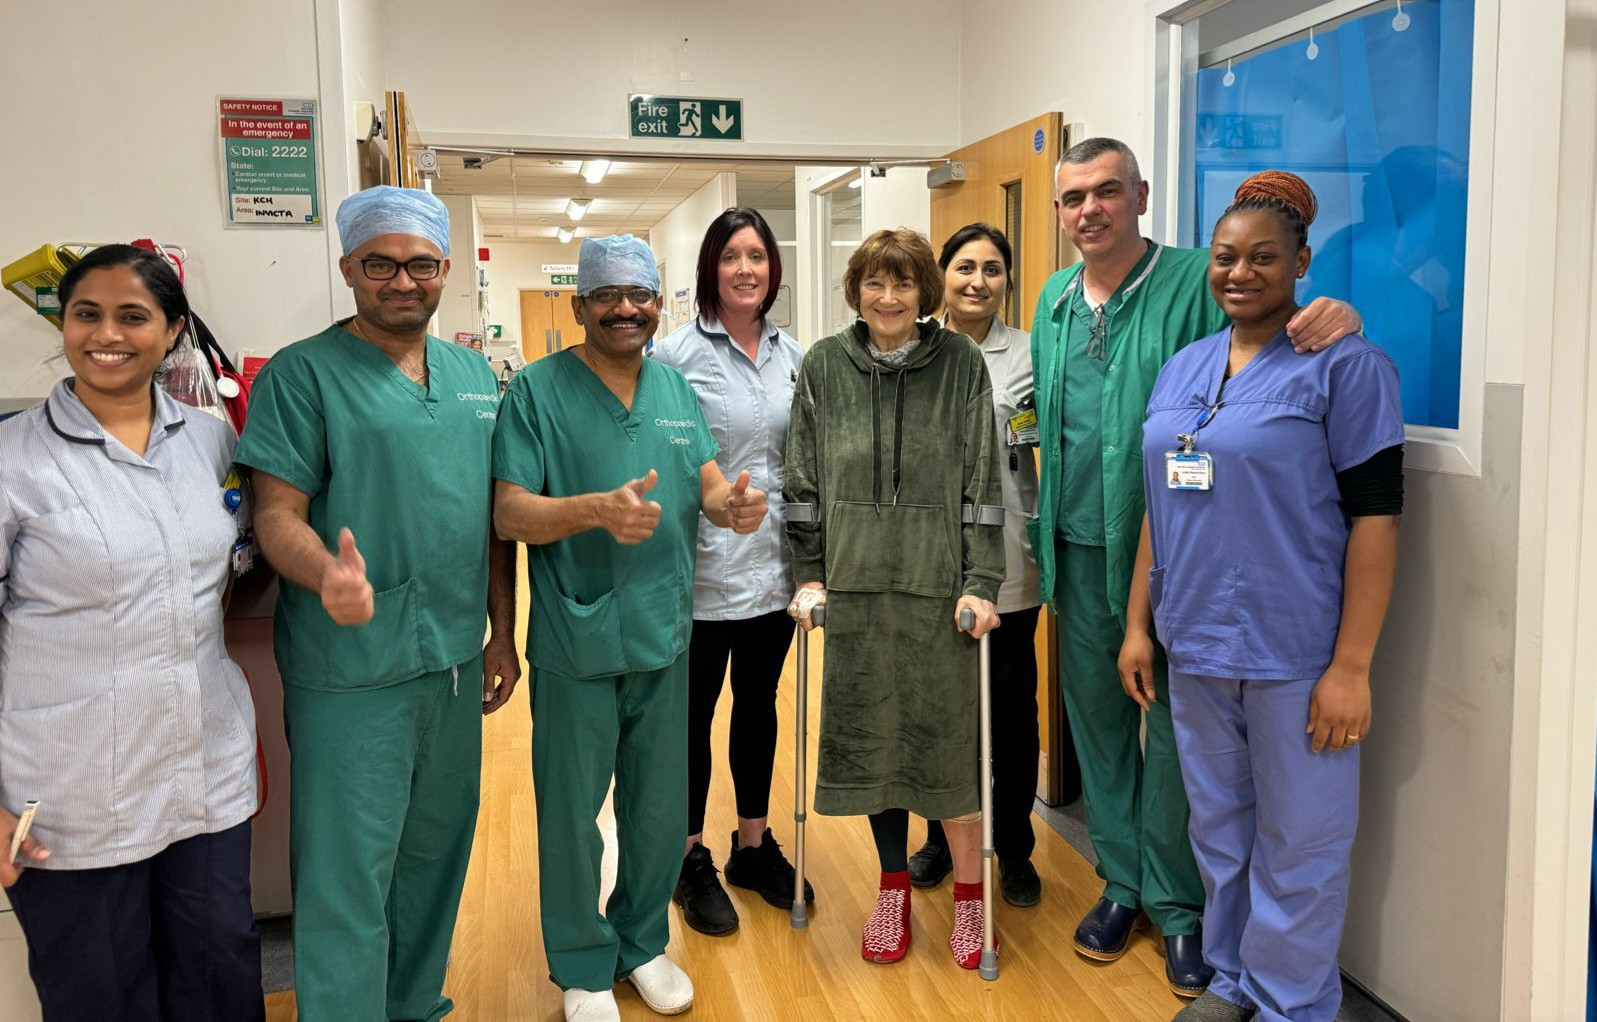 Liz Richardson and some of the team involved in her operation